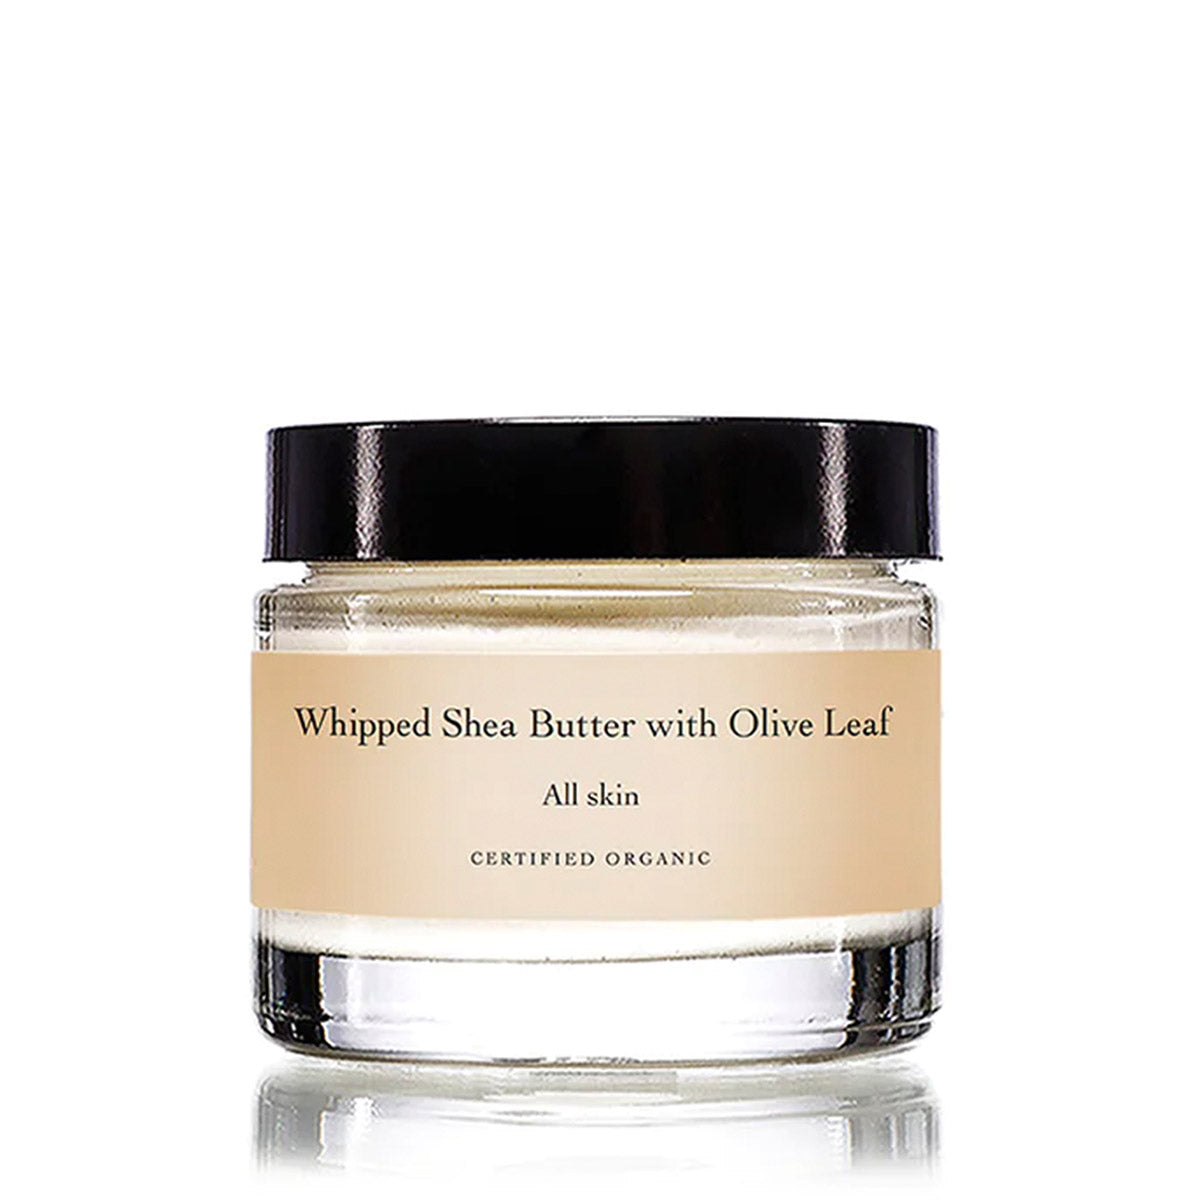 Whipped Shea Butter with Olive Leaf